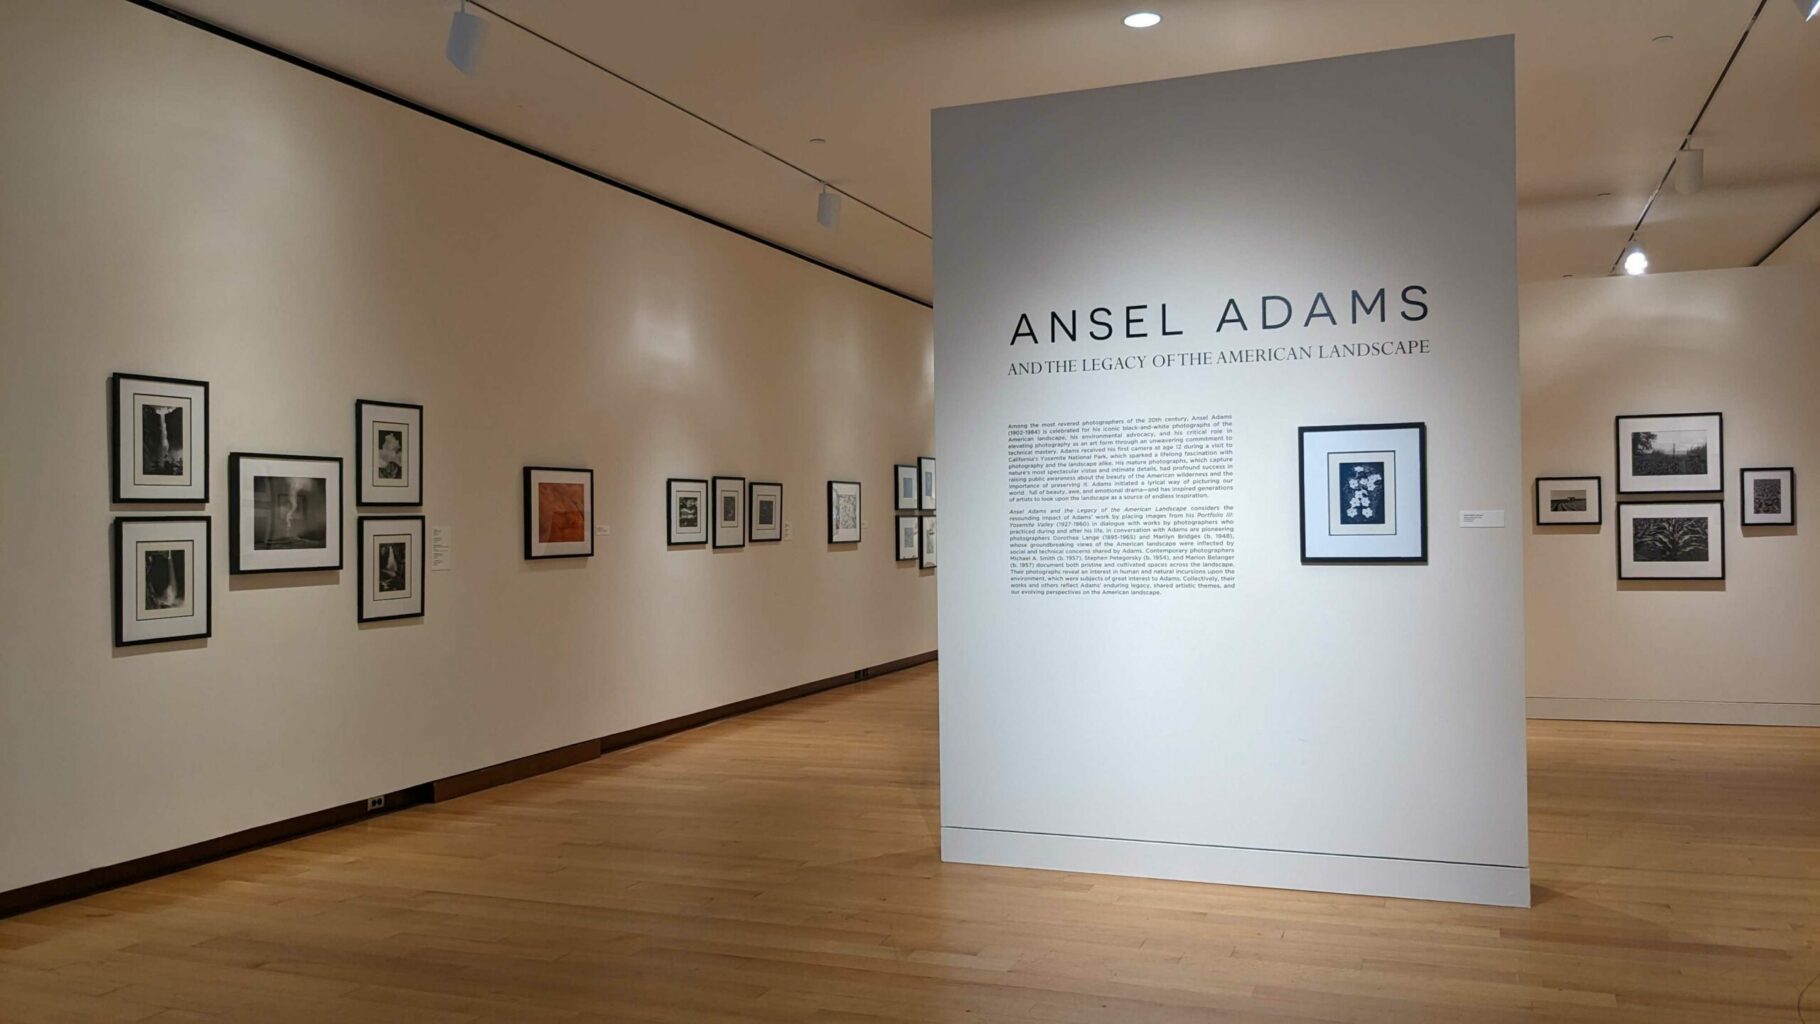 Ansel-Adams-Title-Wall-1-scaled